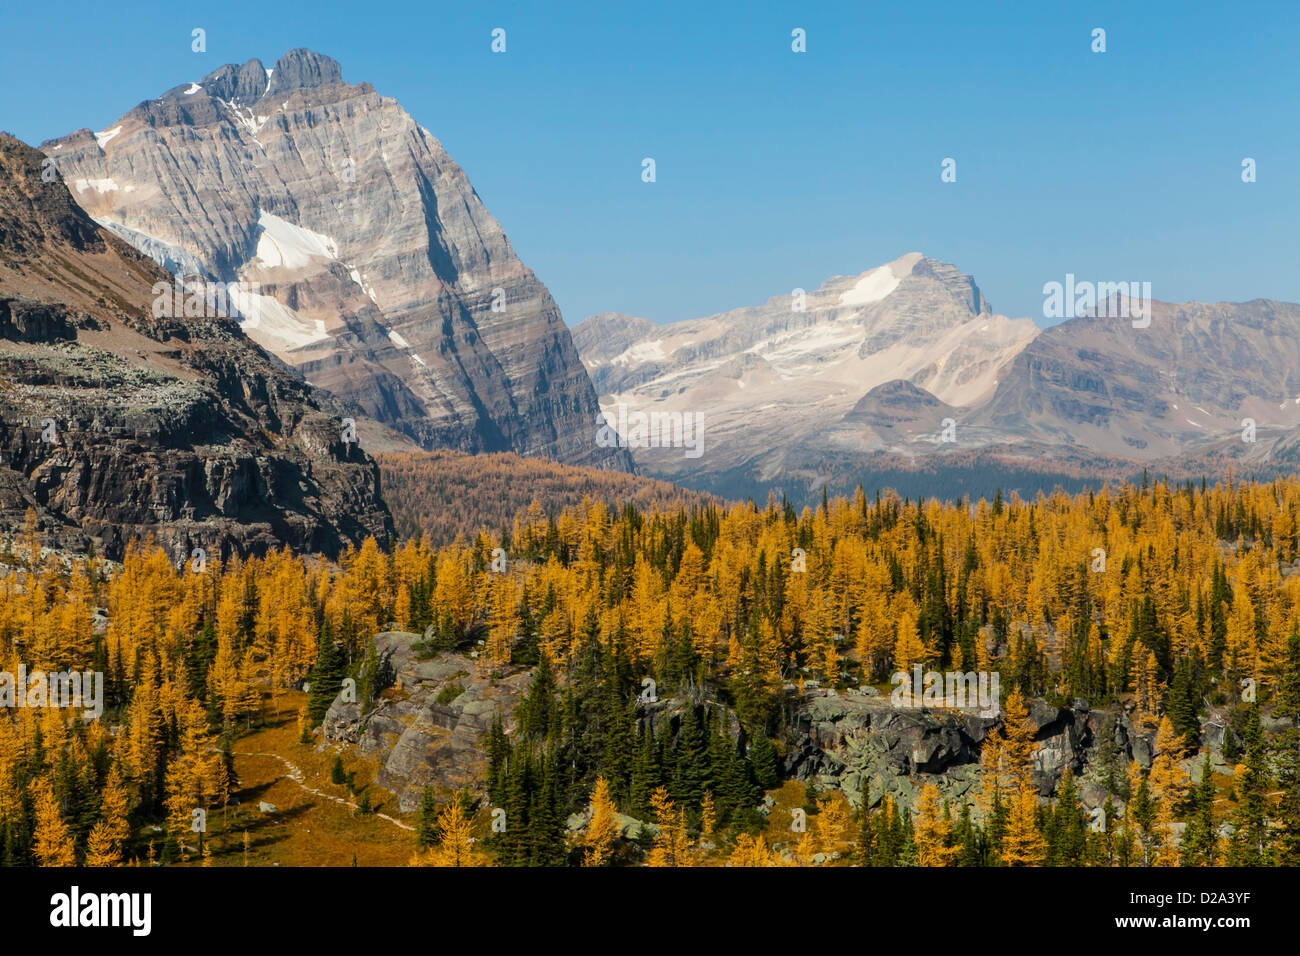 Odaray Mountain above golden larches on Opabin Plateau in fall, Yoho National Park, Canadian Rockies, British Columbia, Canada. Stock Photo